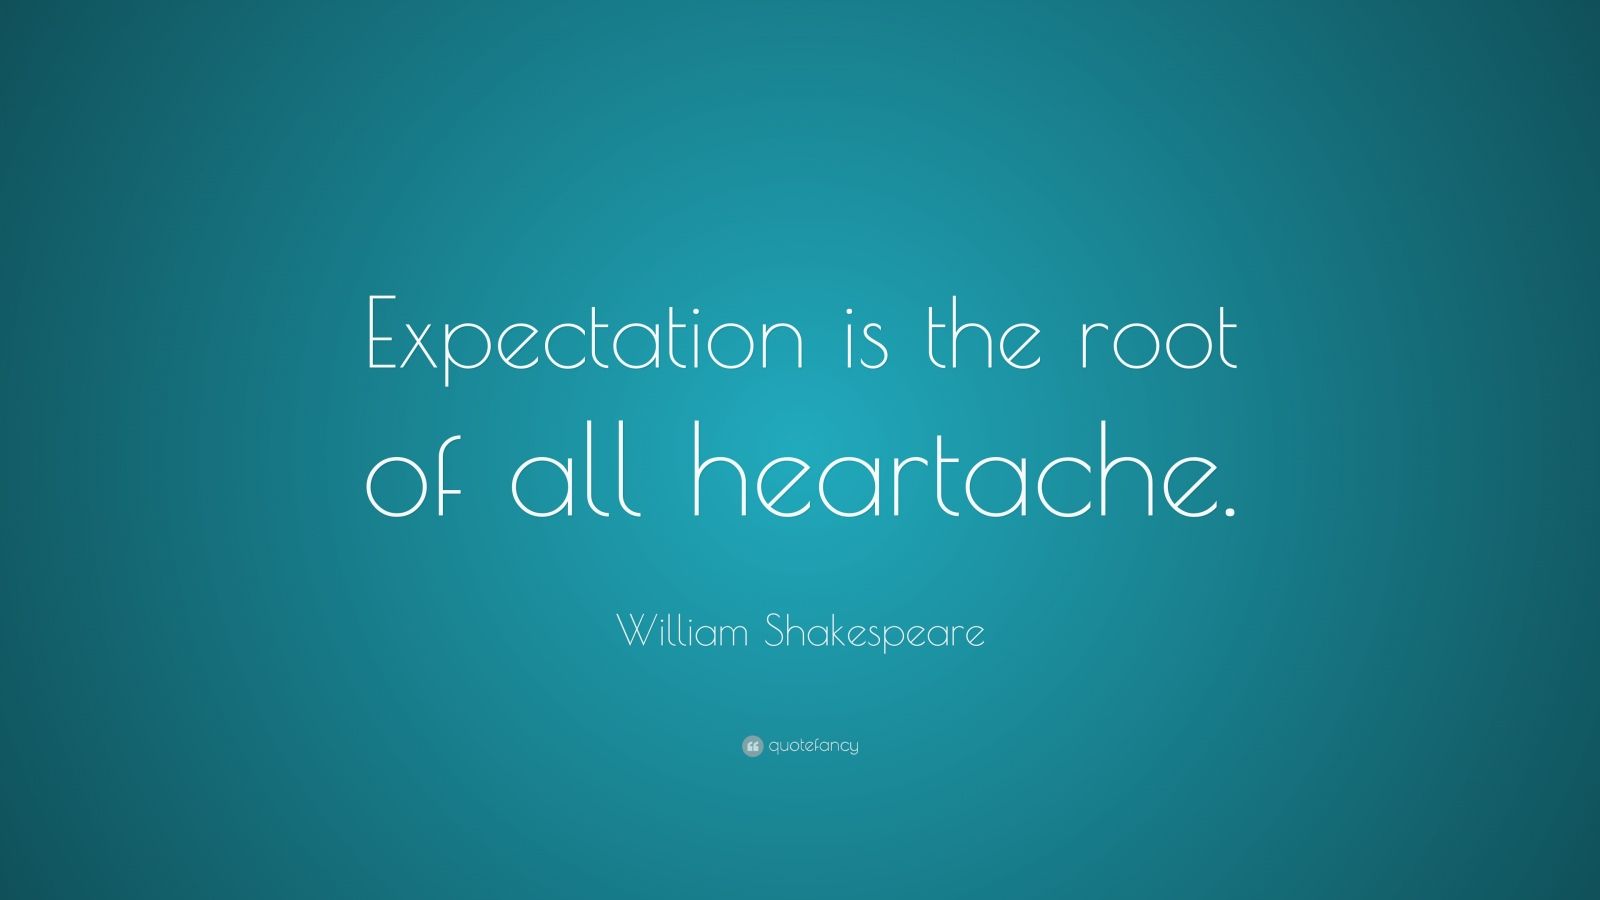 William Shakespeare Quote - Parallel , HD Wallpaper & Backgrounds